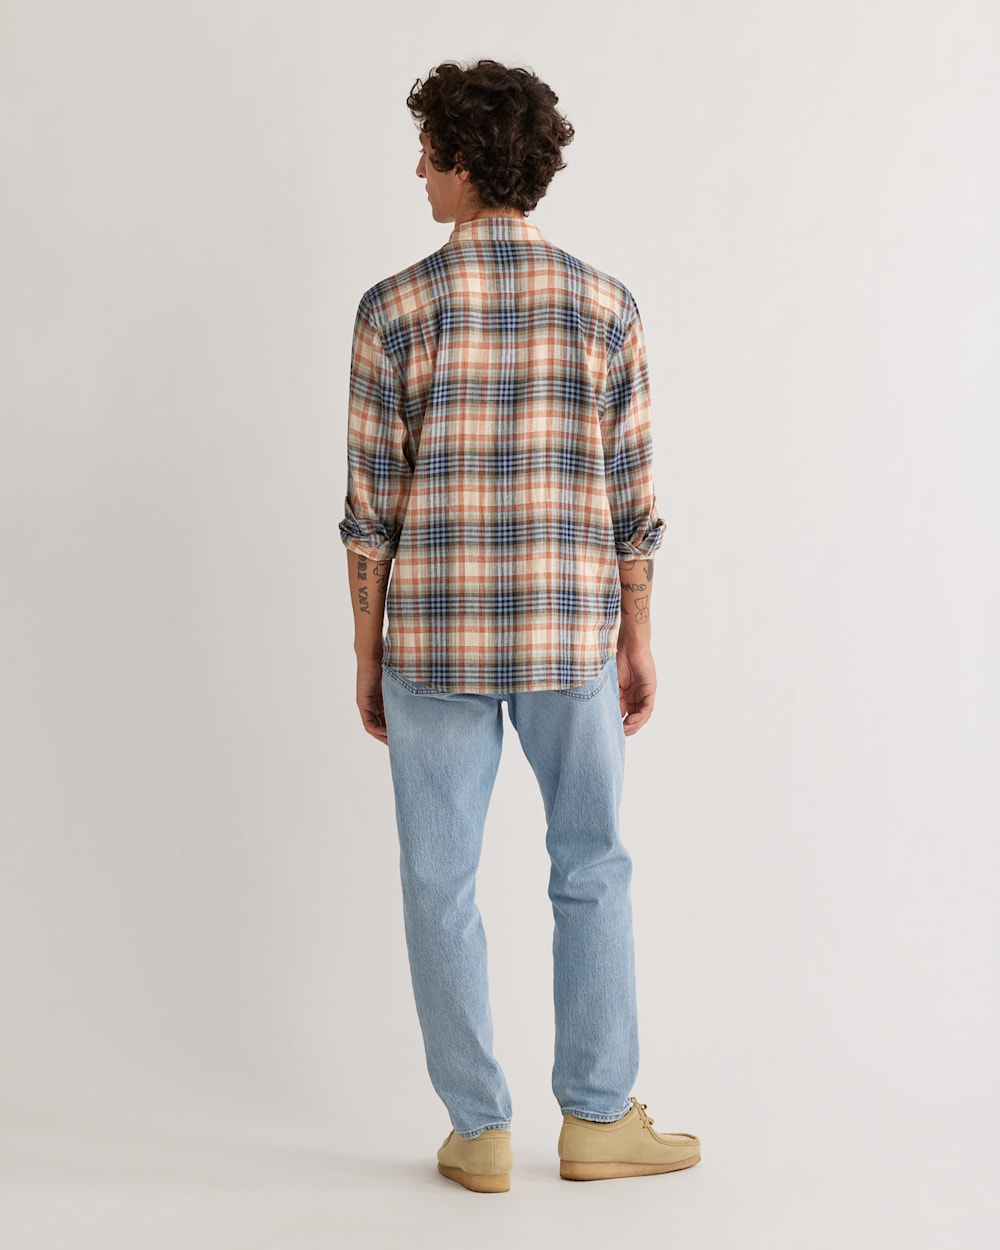 ALTERNATE VIEW OF MEN'S LONG-SLEEVE DAWSON LINEN SHIRT IN RUST/GRAPHITE/STONE PLAID image number 3